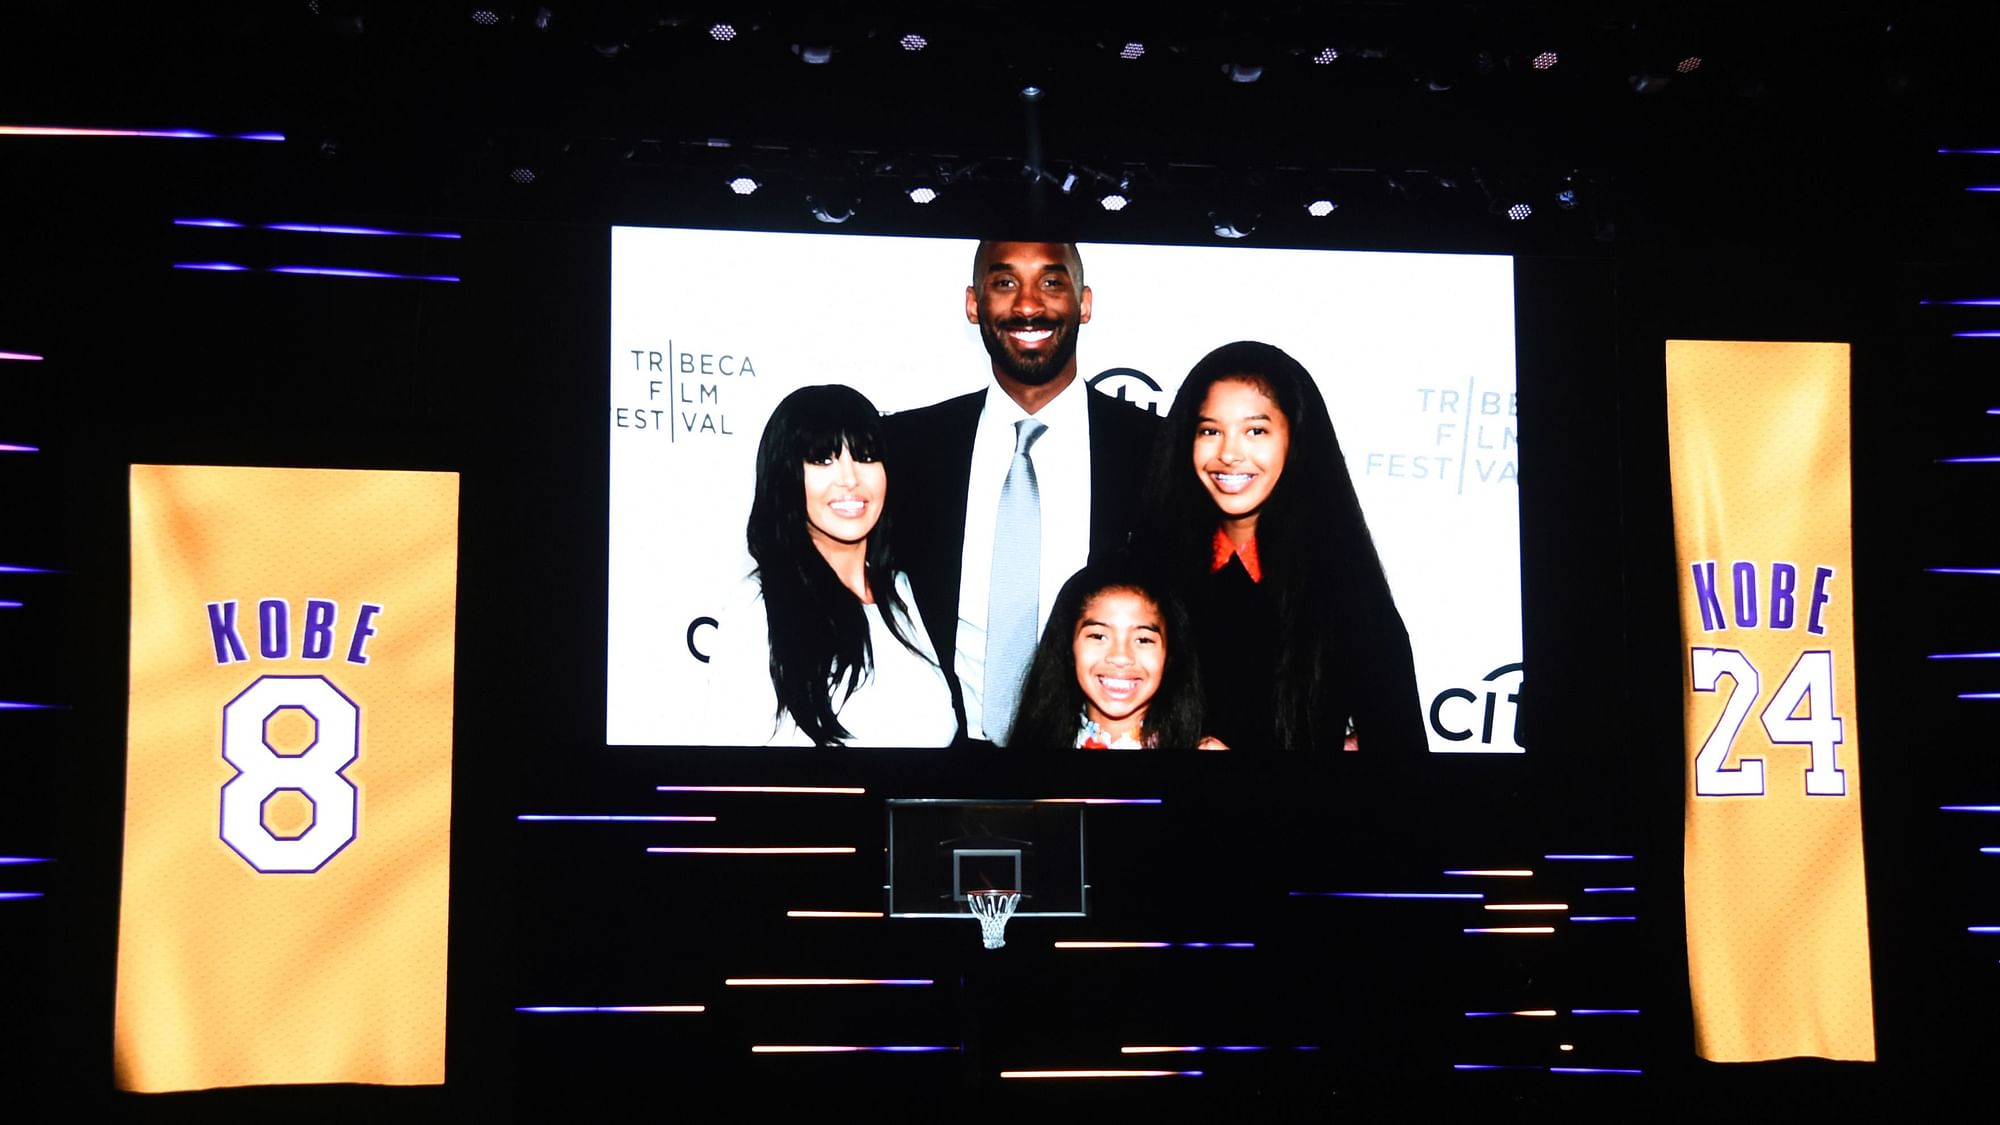 The memorial ended after the film was shown, and the crowd began chanting, “Kobe! Kobe!”